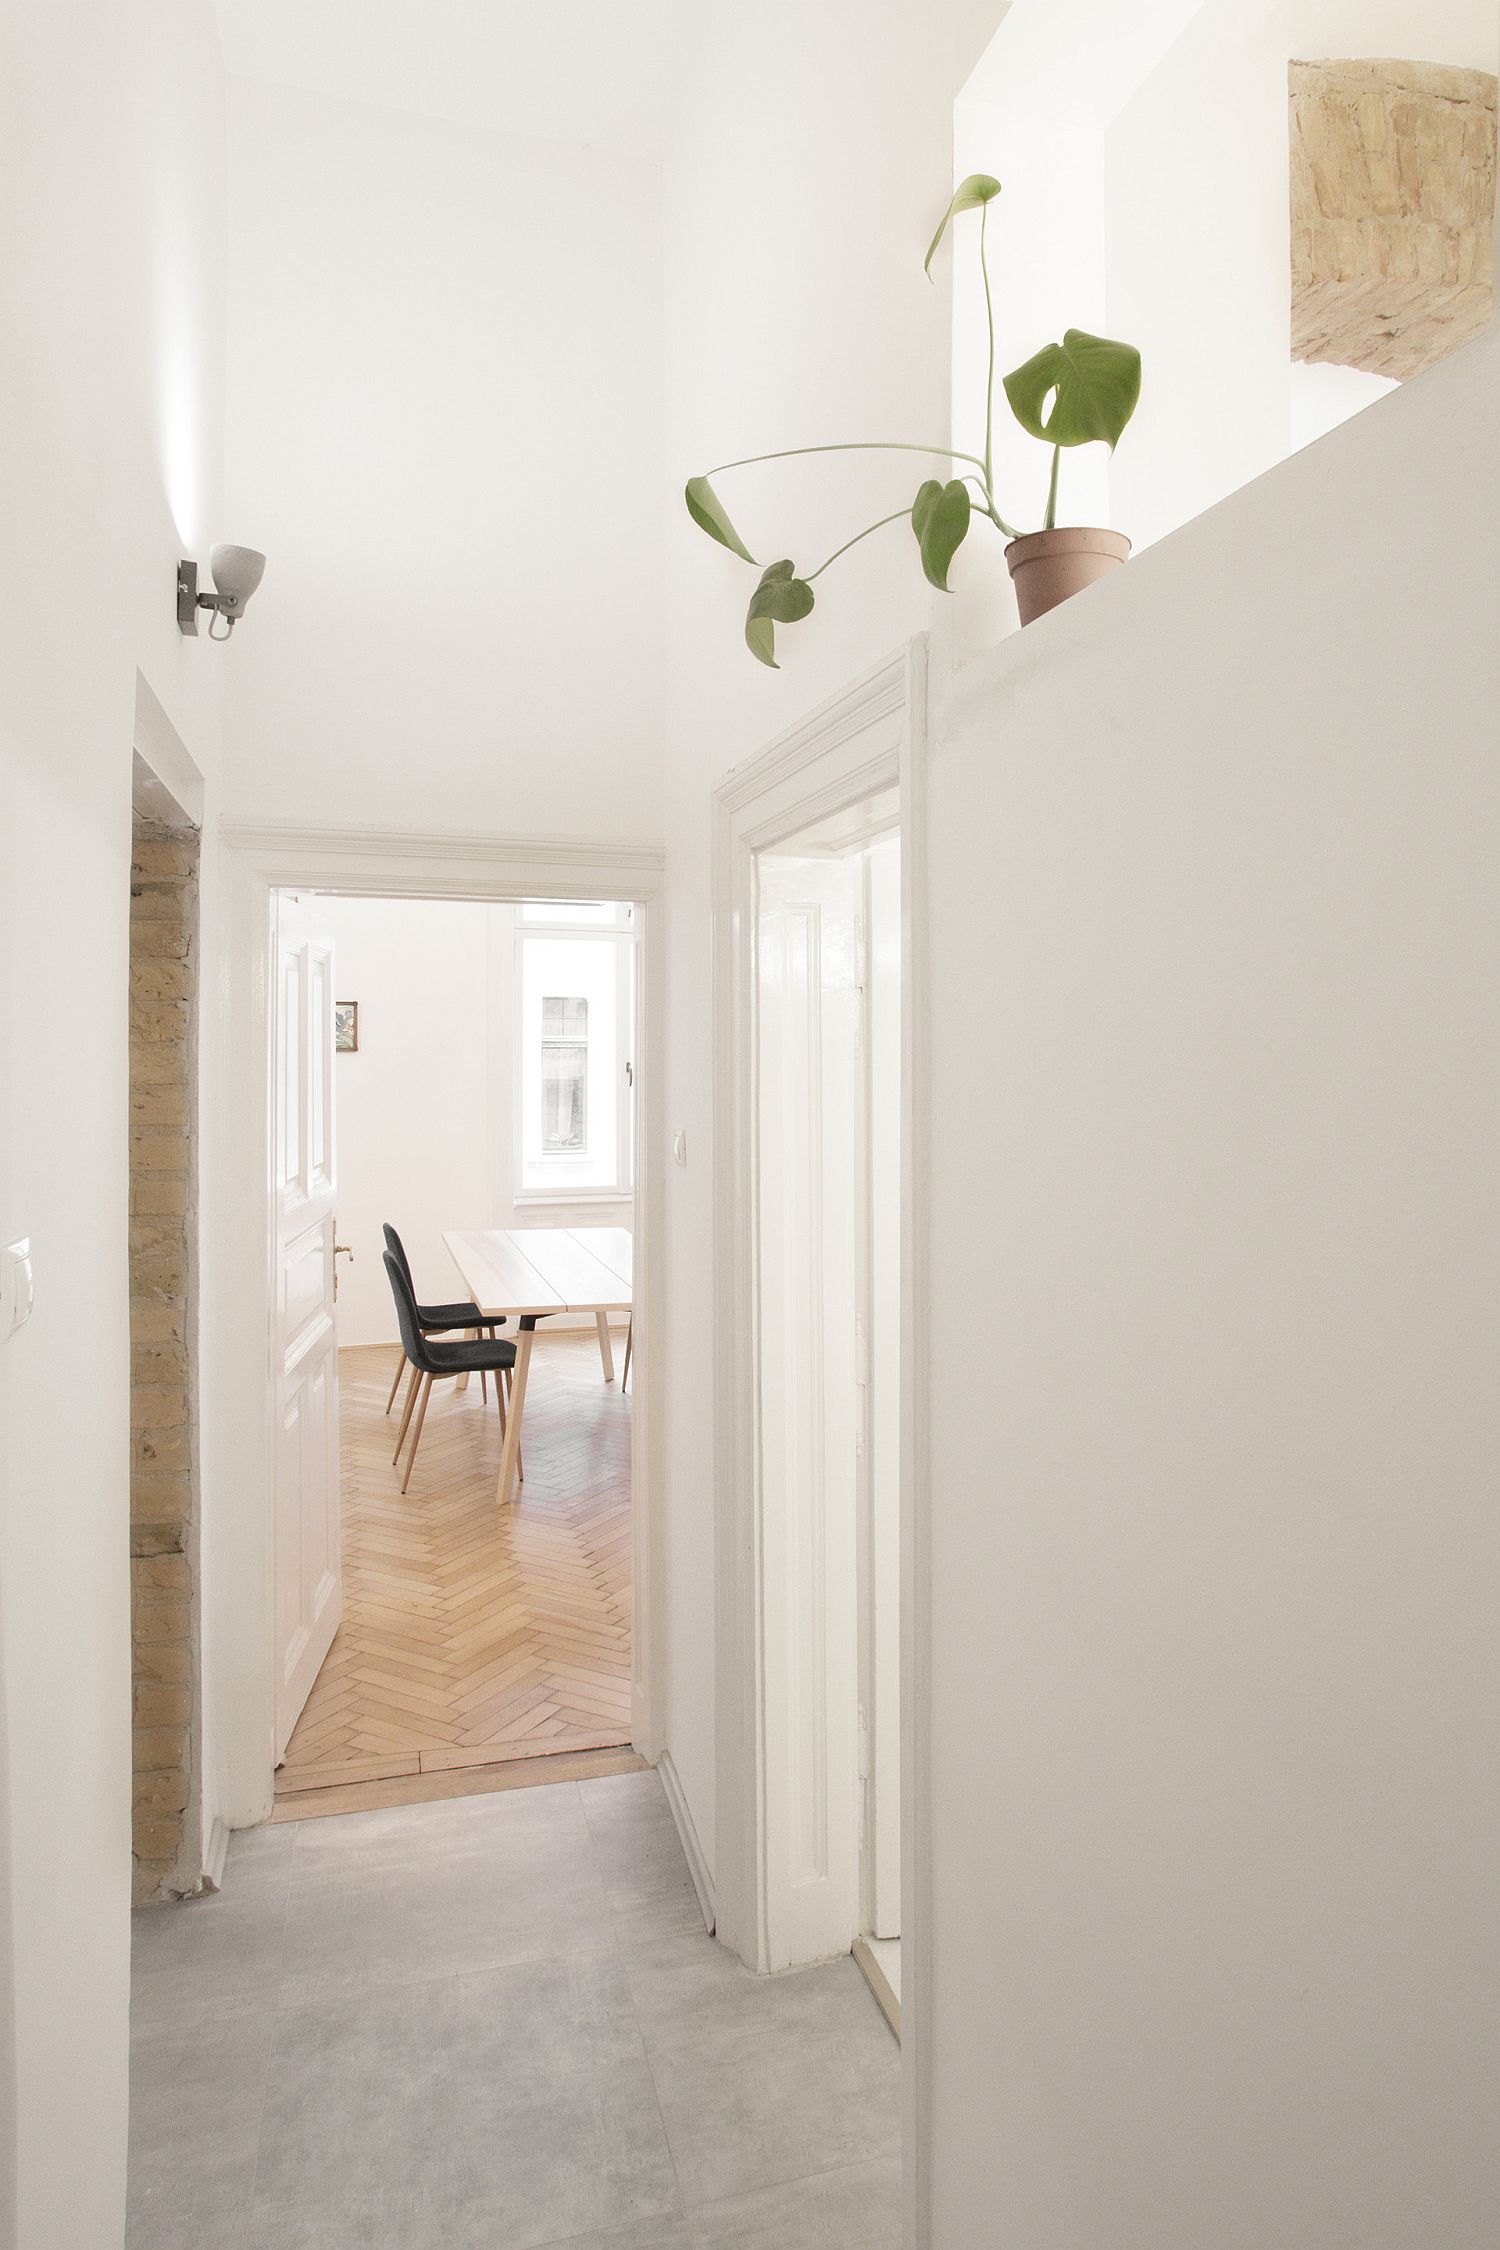 Transition between different zones of the renovated apartment